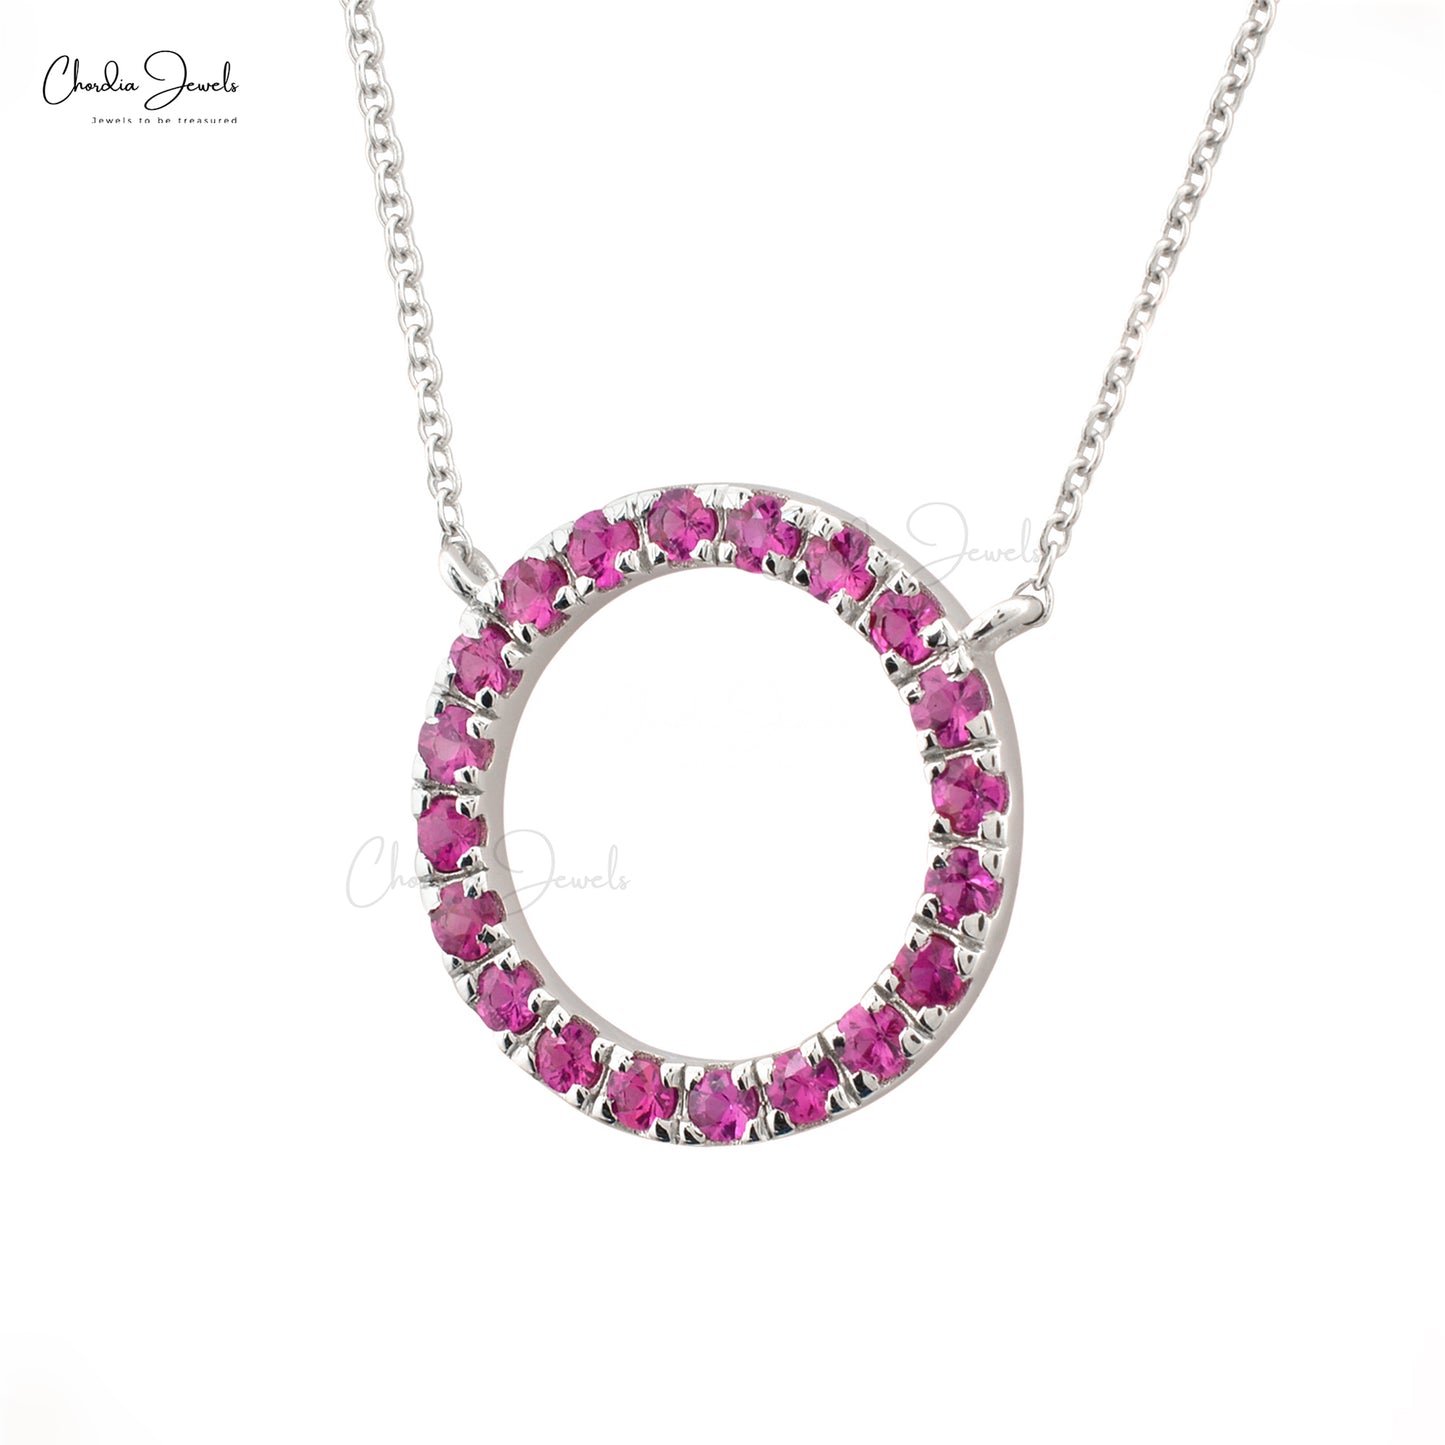 Authentic Pink Sapphire Round Beaded Necklace Pendant For Girls 14k Real White Gold Light Weight Jewelry Wedding Gift